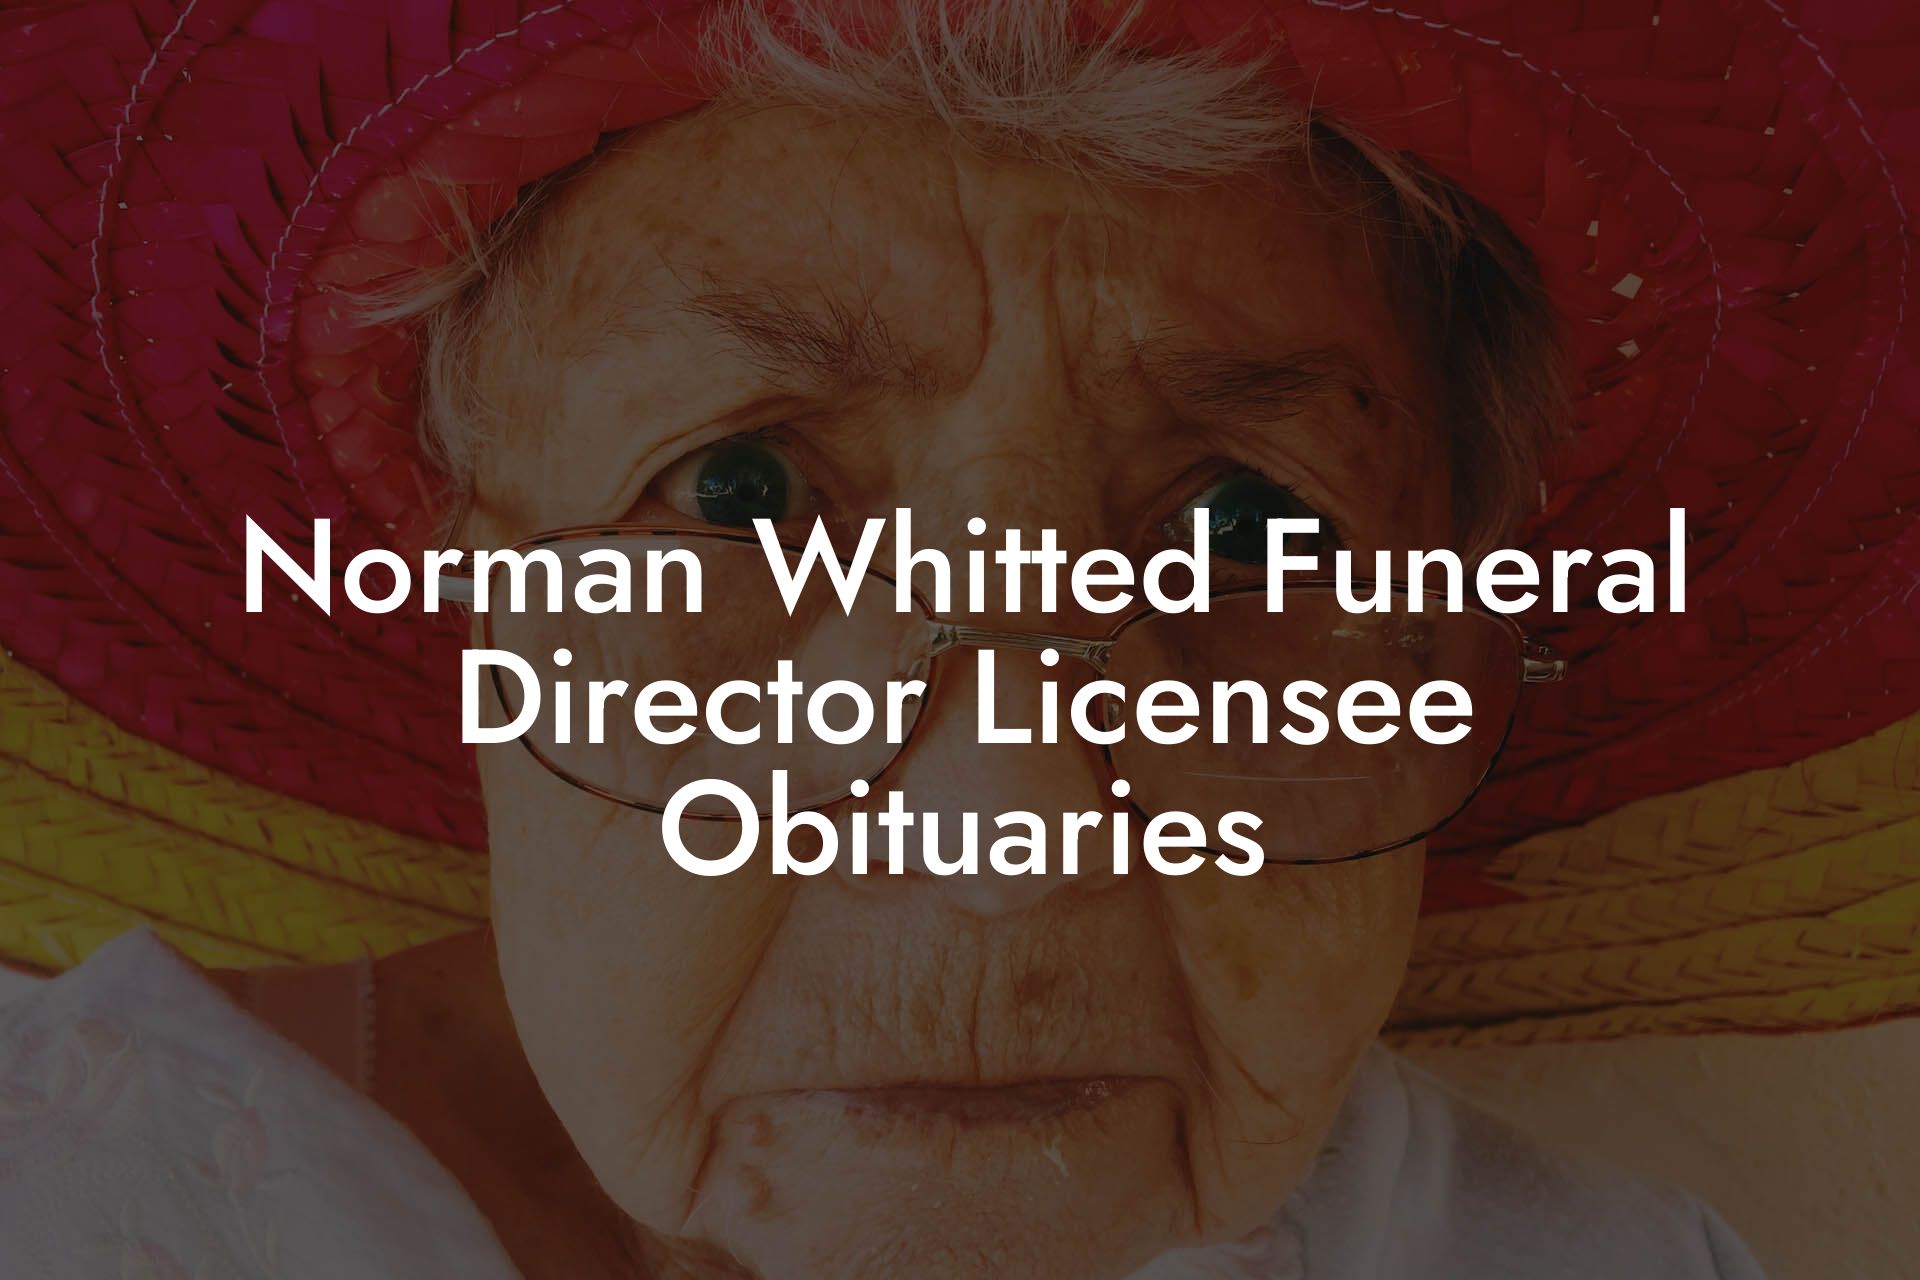 Norman Whitted Funeral Director Licensee Obituaries